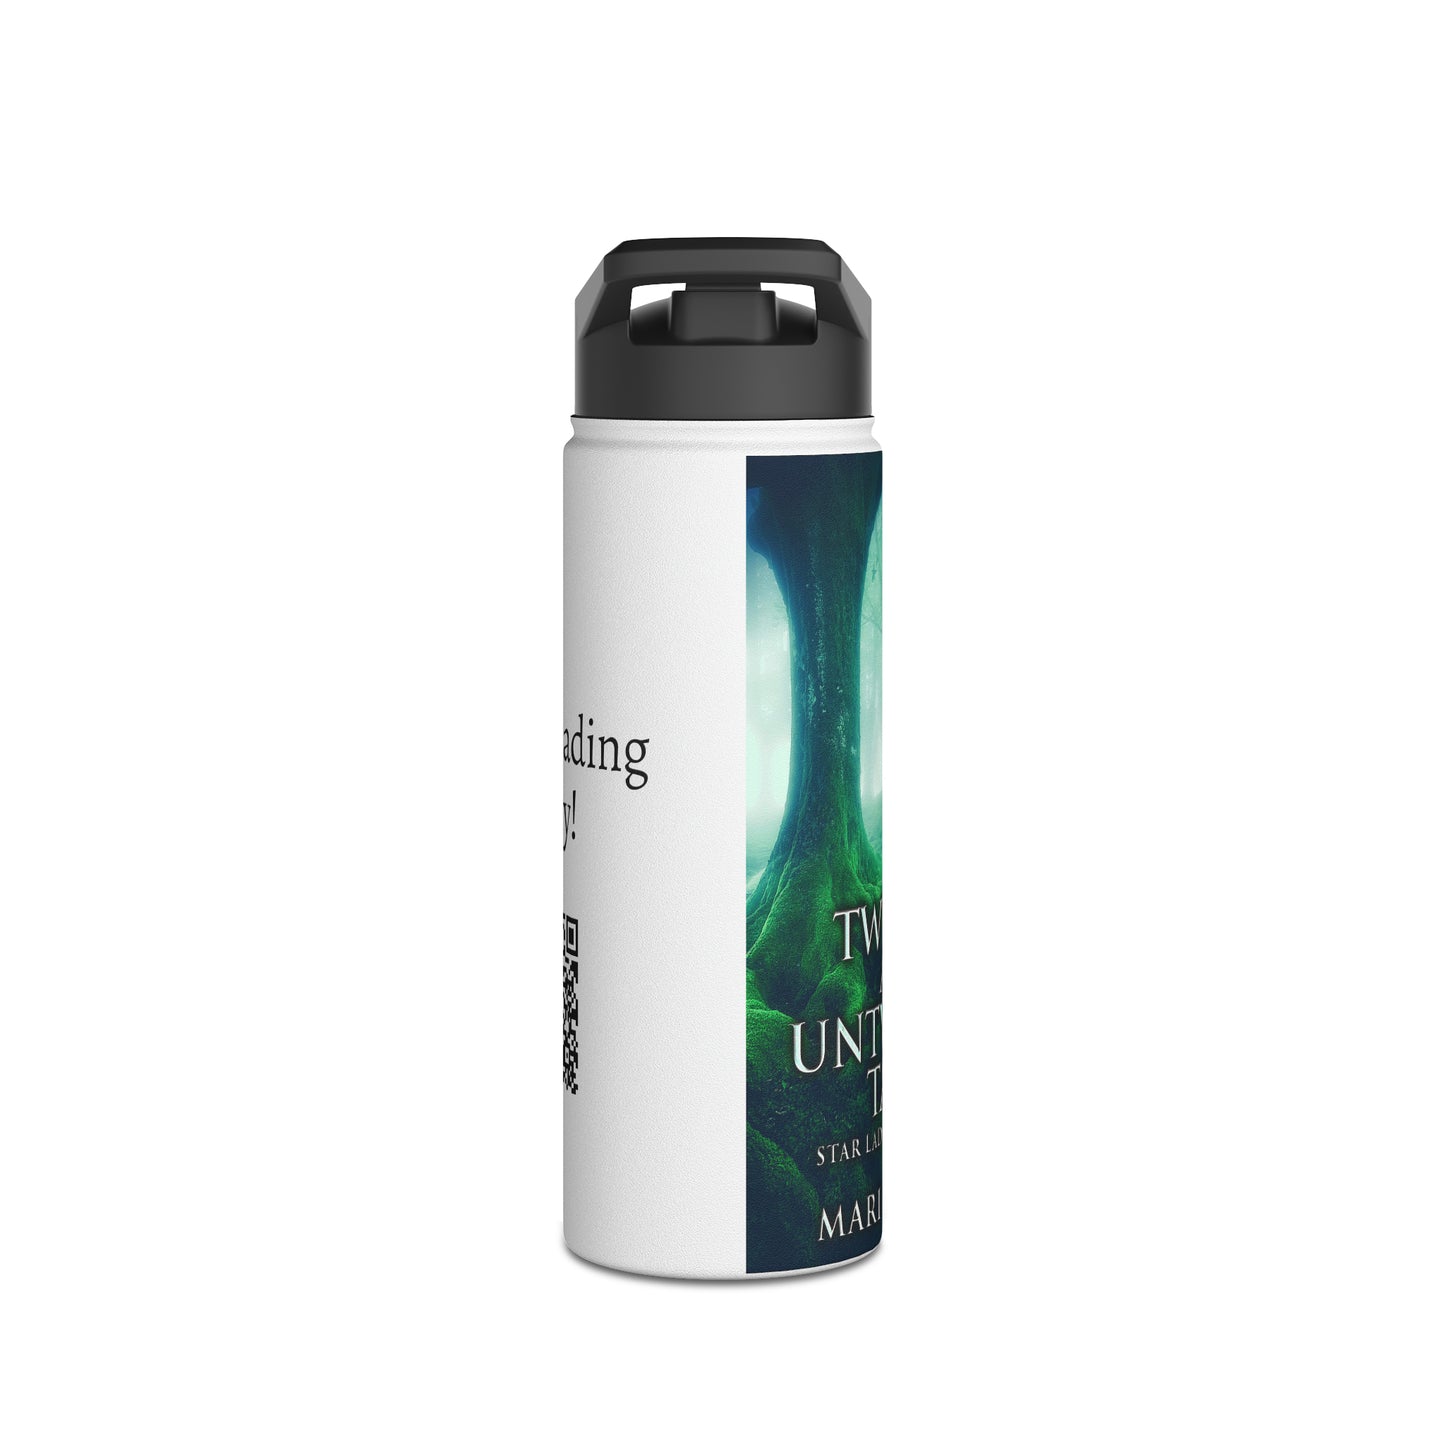 Twisted And Untwisted Tales - Stainless Steel Water Bottle